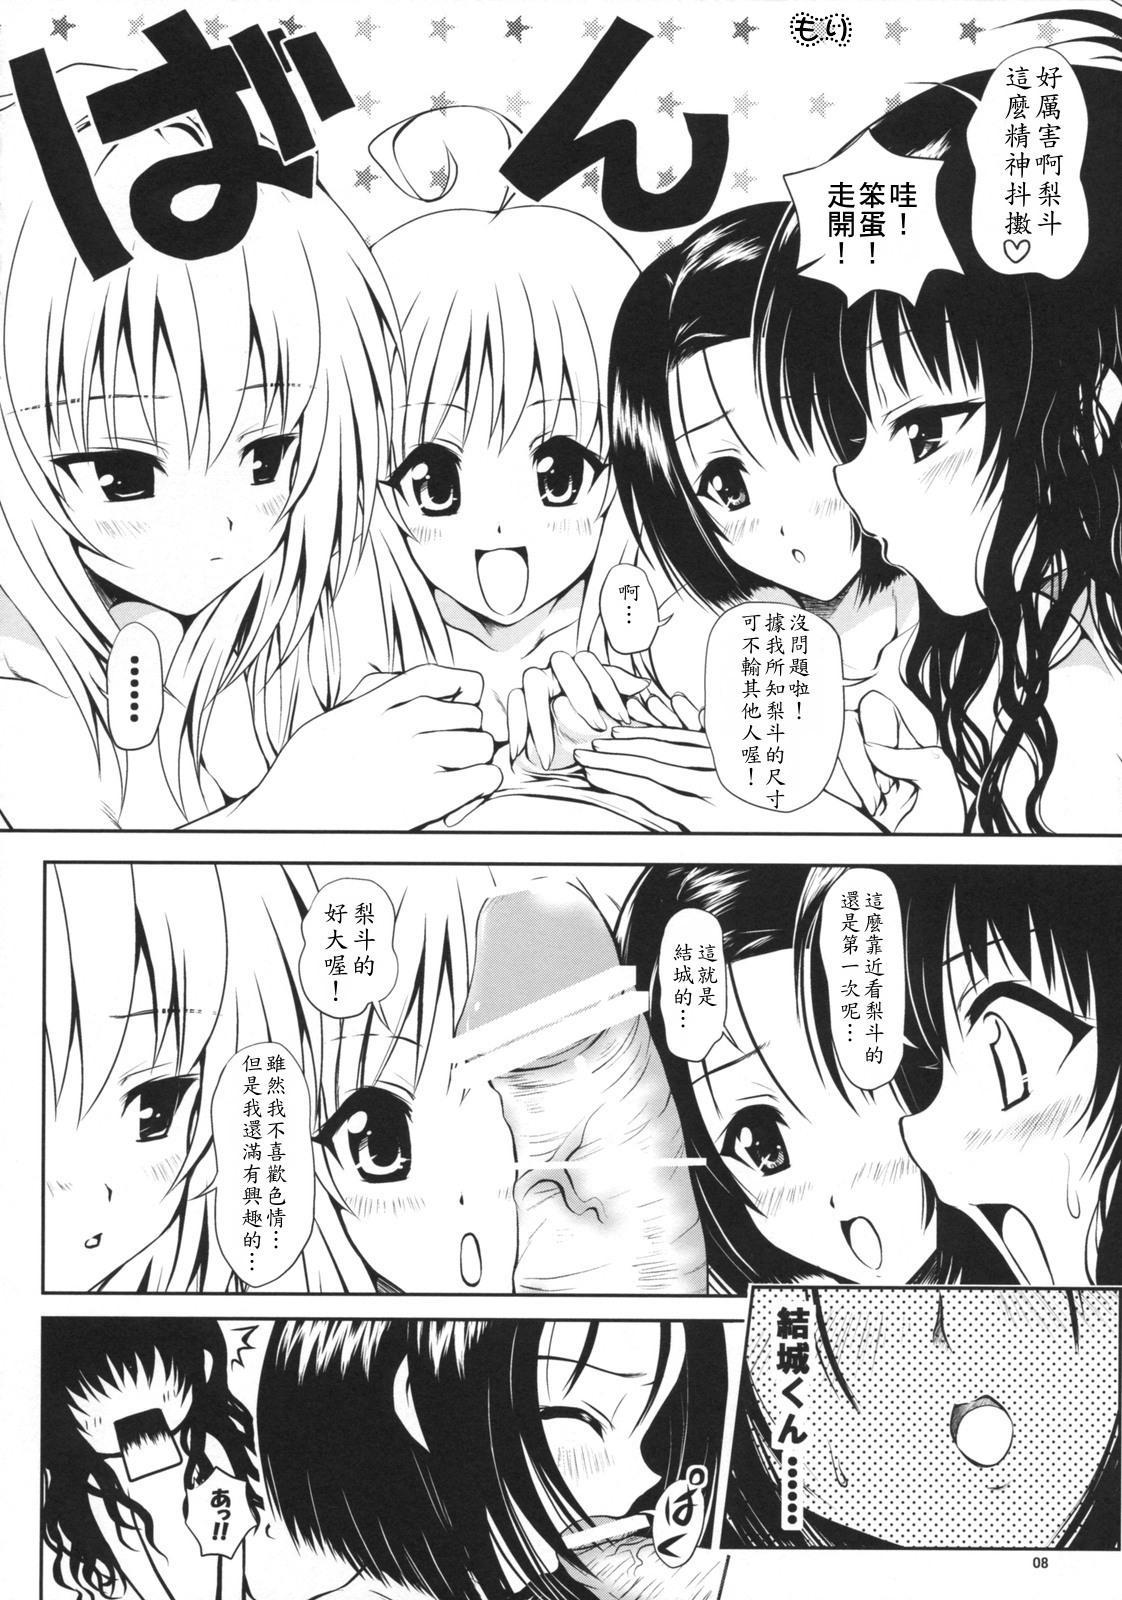 Camshow TryLOVE-ru - To love-ru Indoor - Page 7